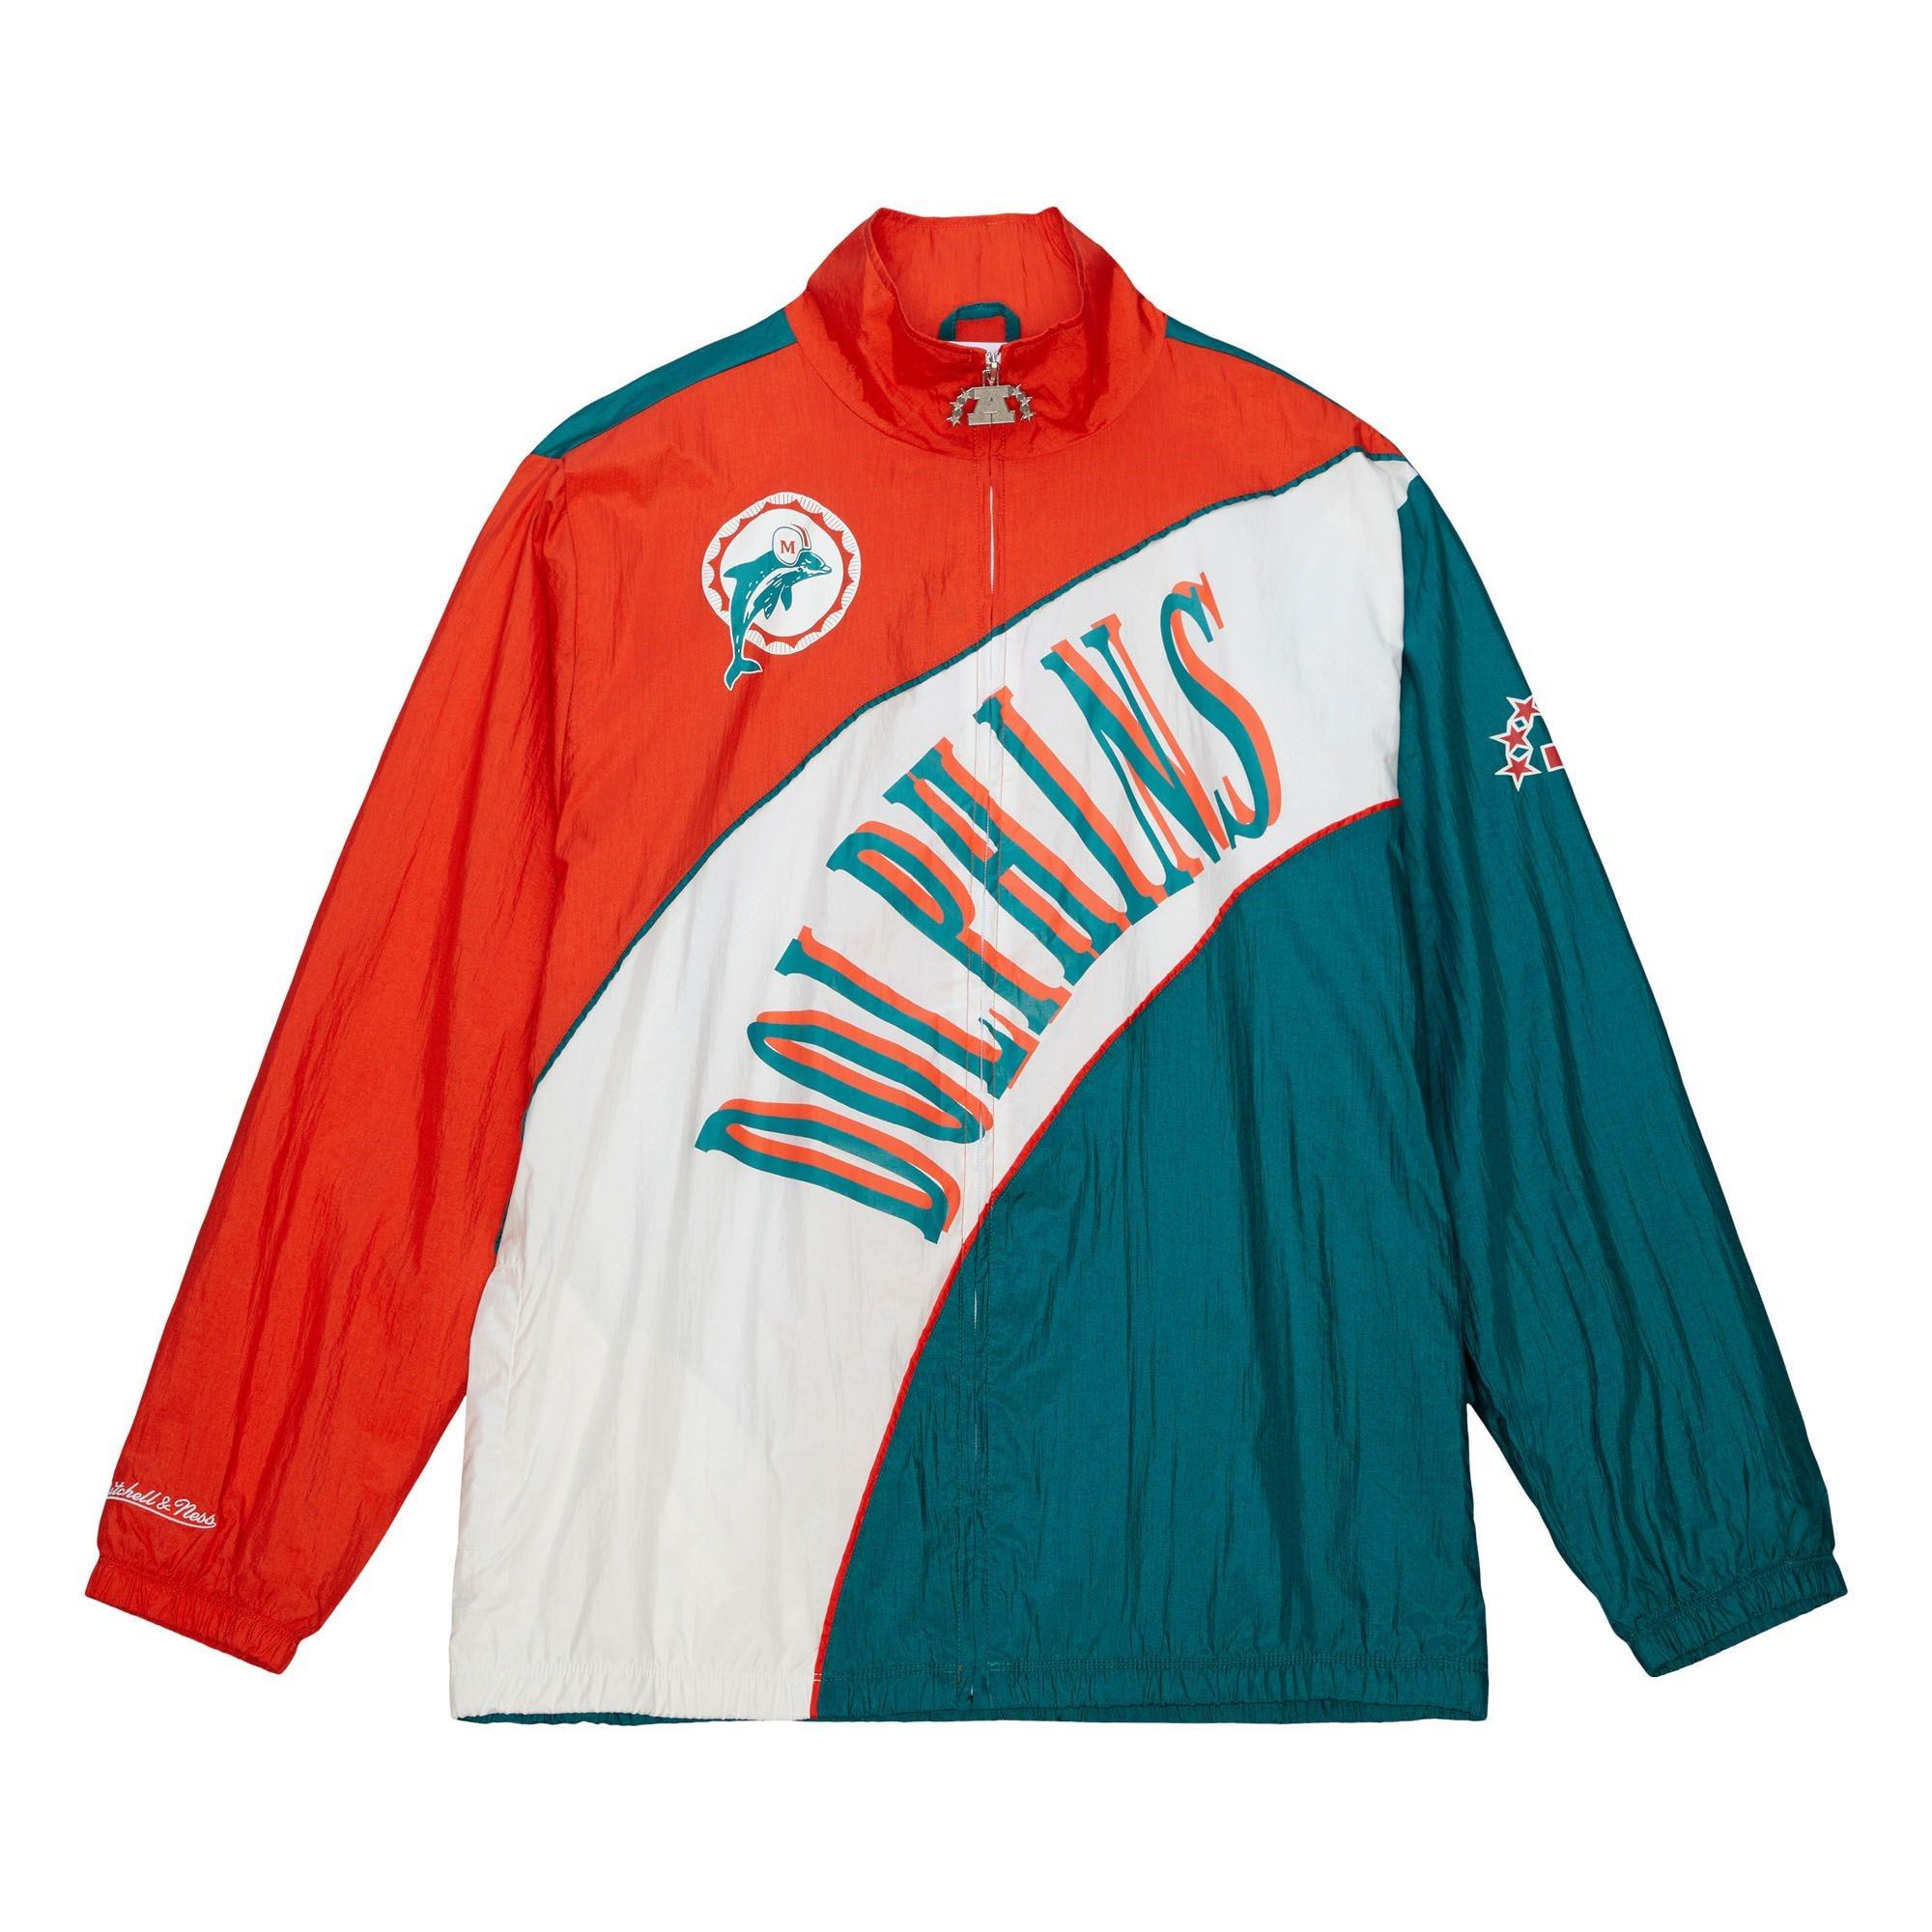 Miami Dolphins NFL Arched Retro Lined Windbreaker Turquoise Orange Jacke Mitchell & Ness